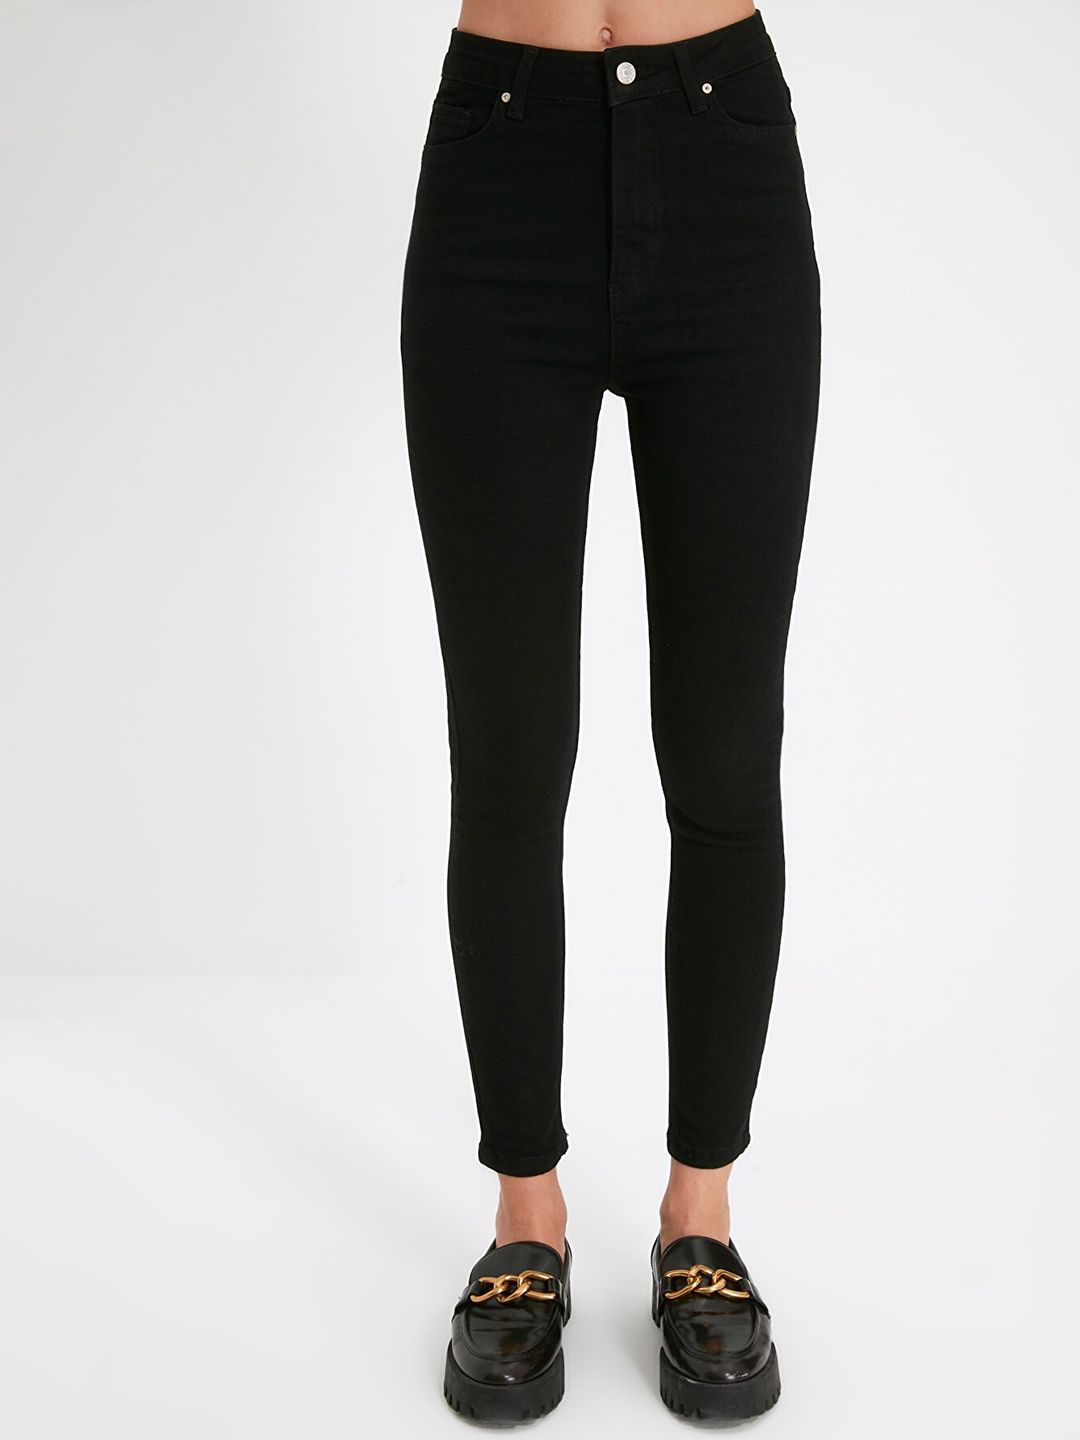 Trendyol Women Black Stretchable High Waist Skinny Jeans Price in India